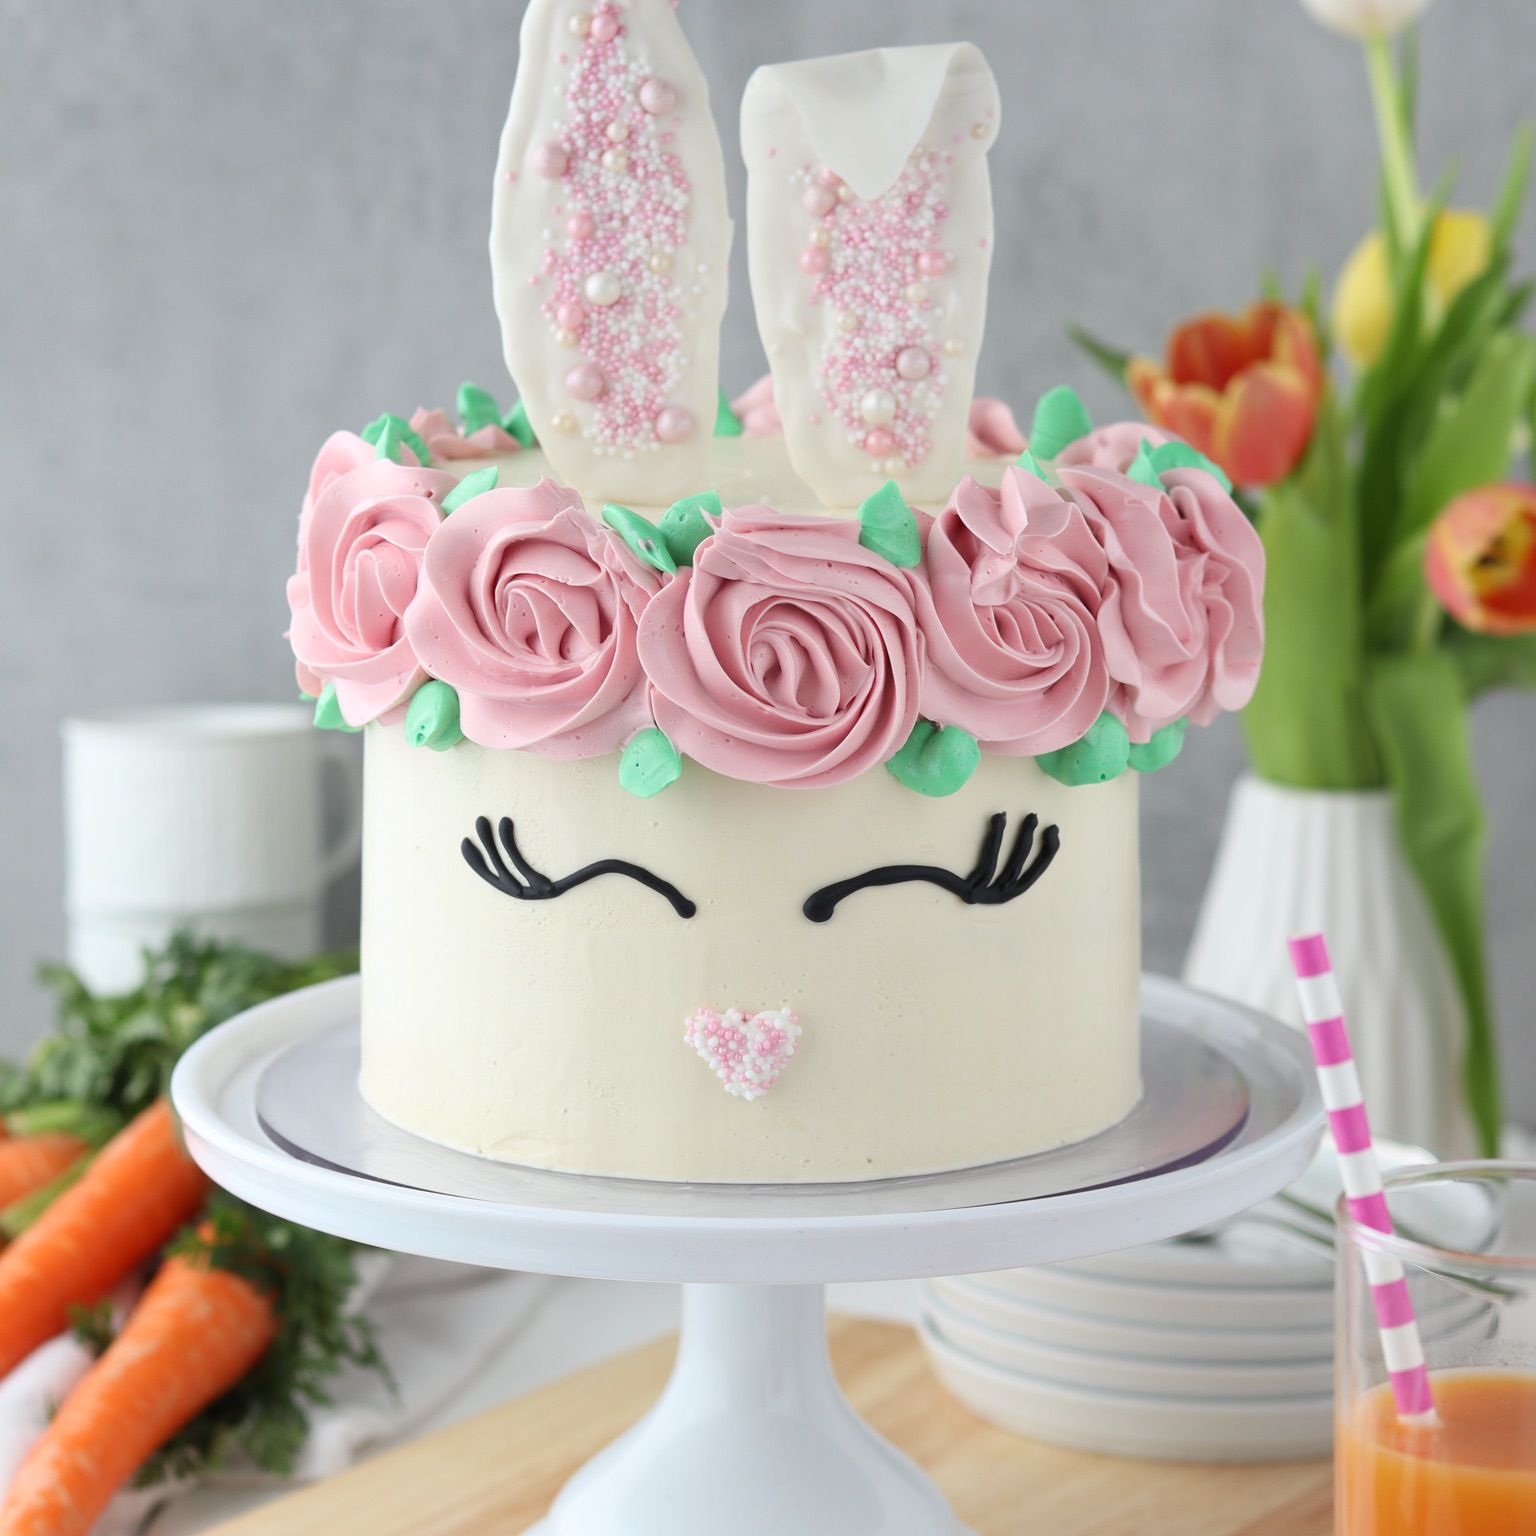 Easter cake - carrot cake and Cream frosting